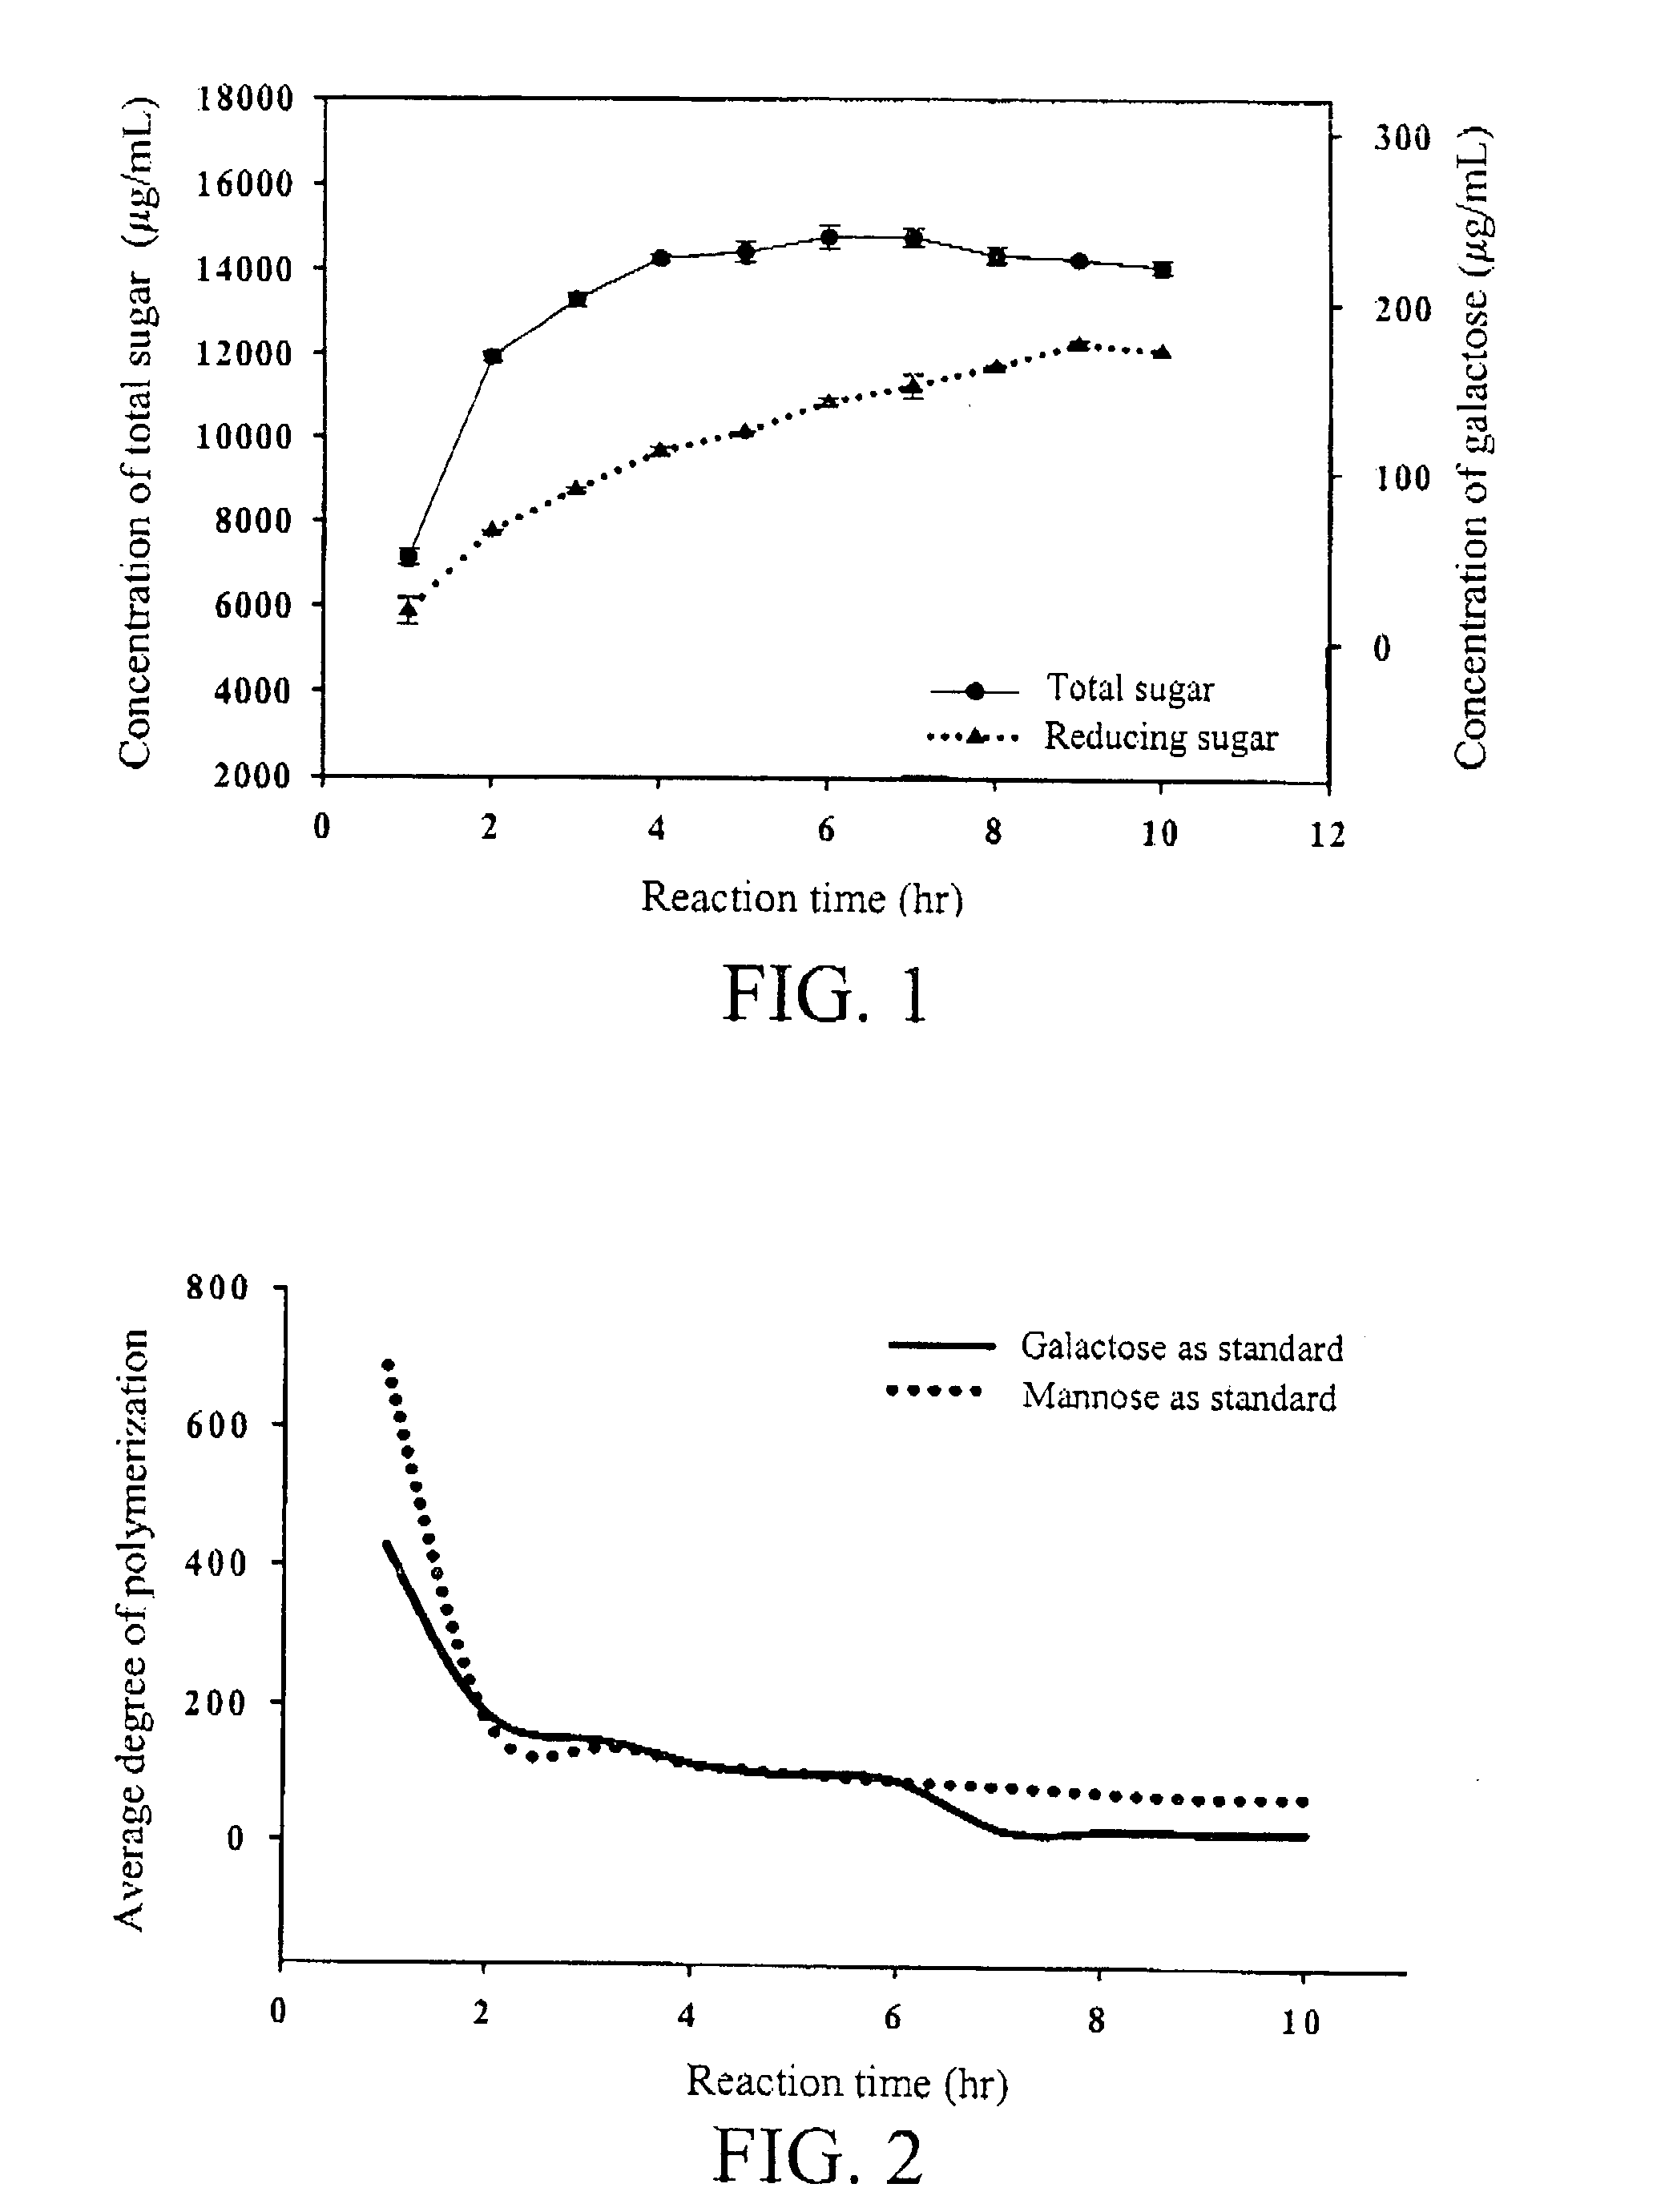 Marine algal extracts comprising marine algal polysaccharides of low degree polymerizaton, and the preparation processes and uses thereof